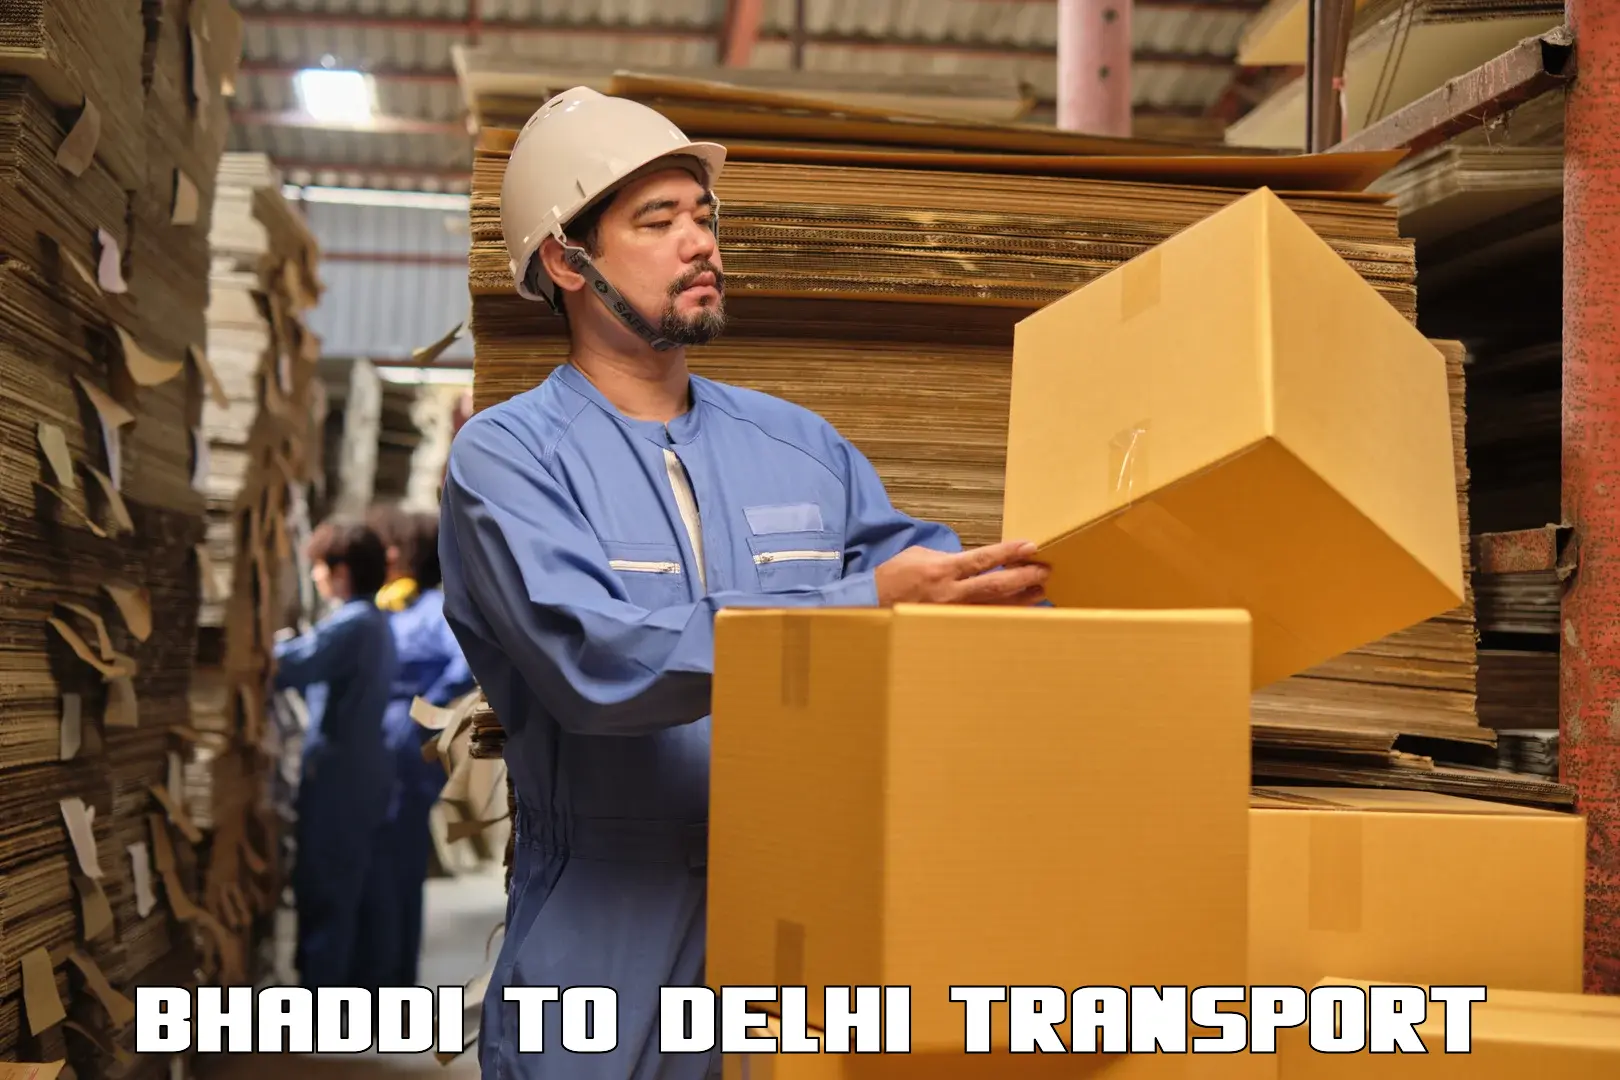 Container transport service Bhaddi to Indraprastha